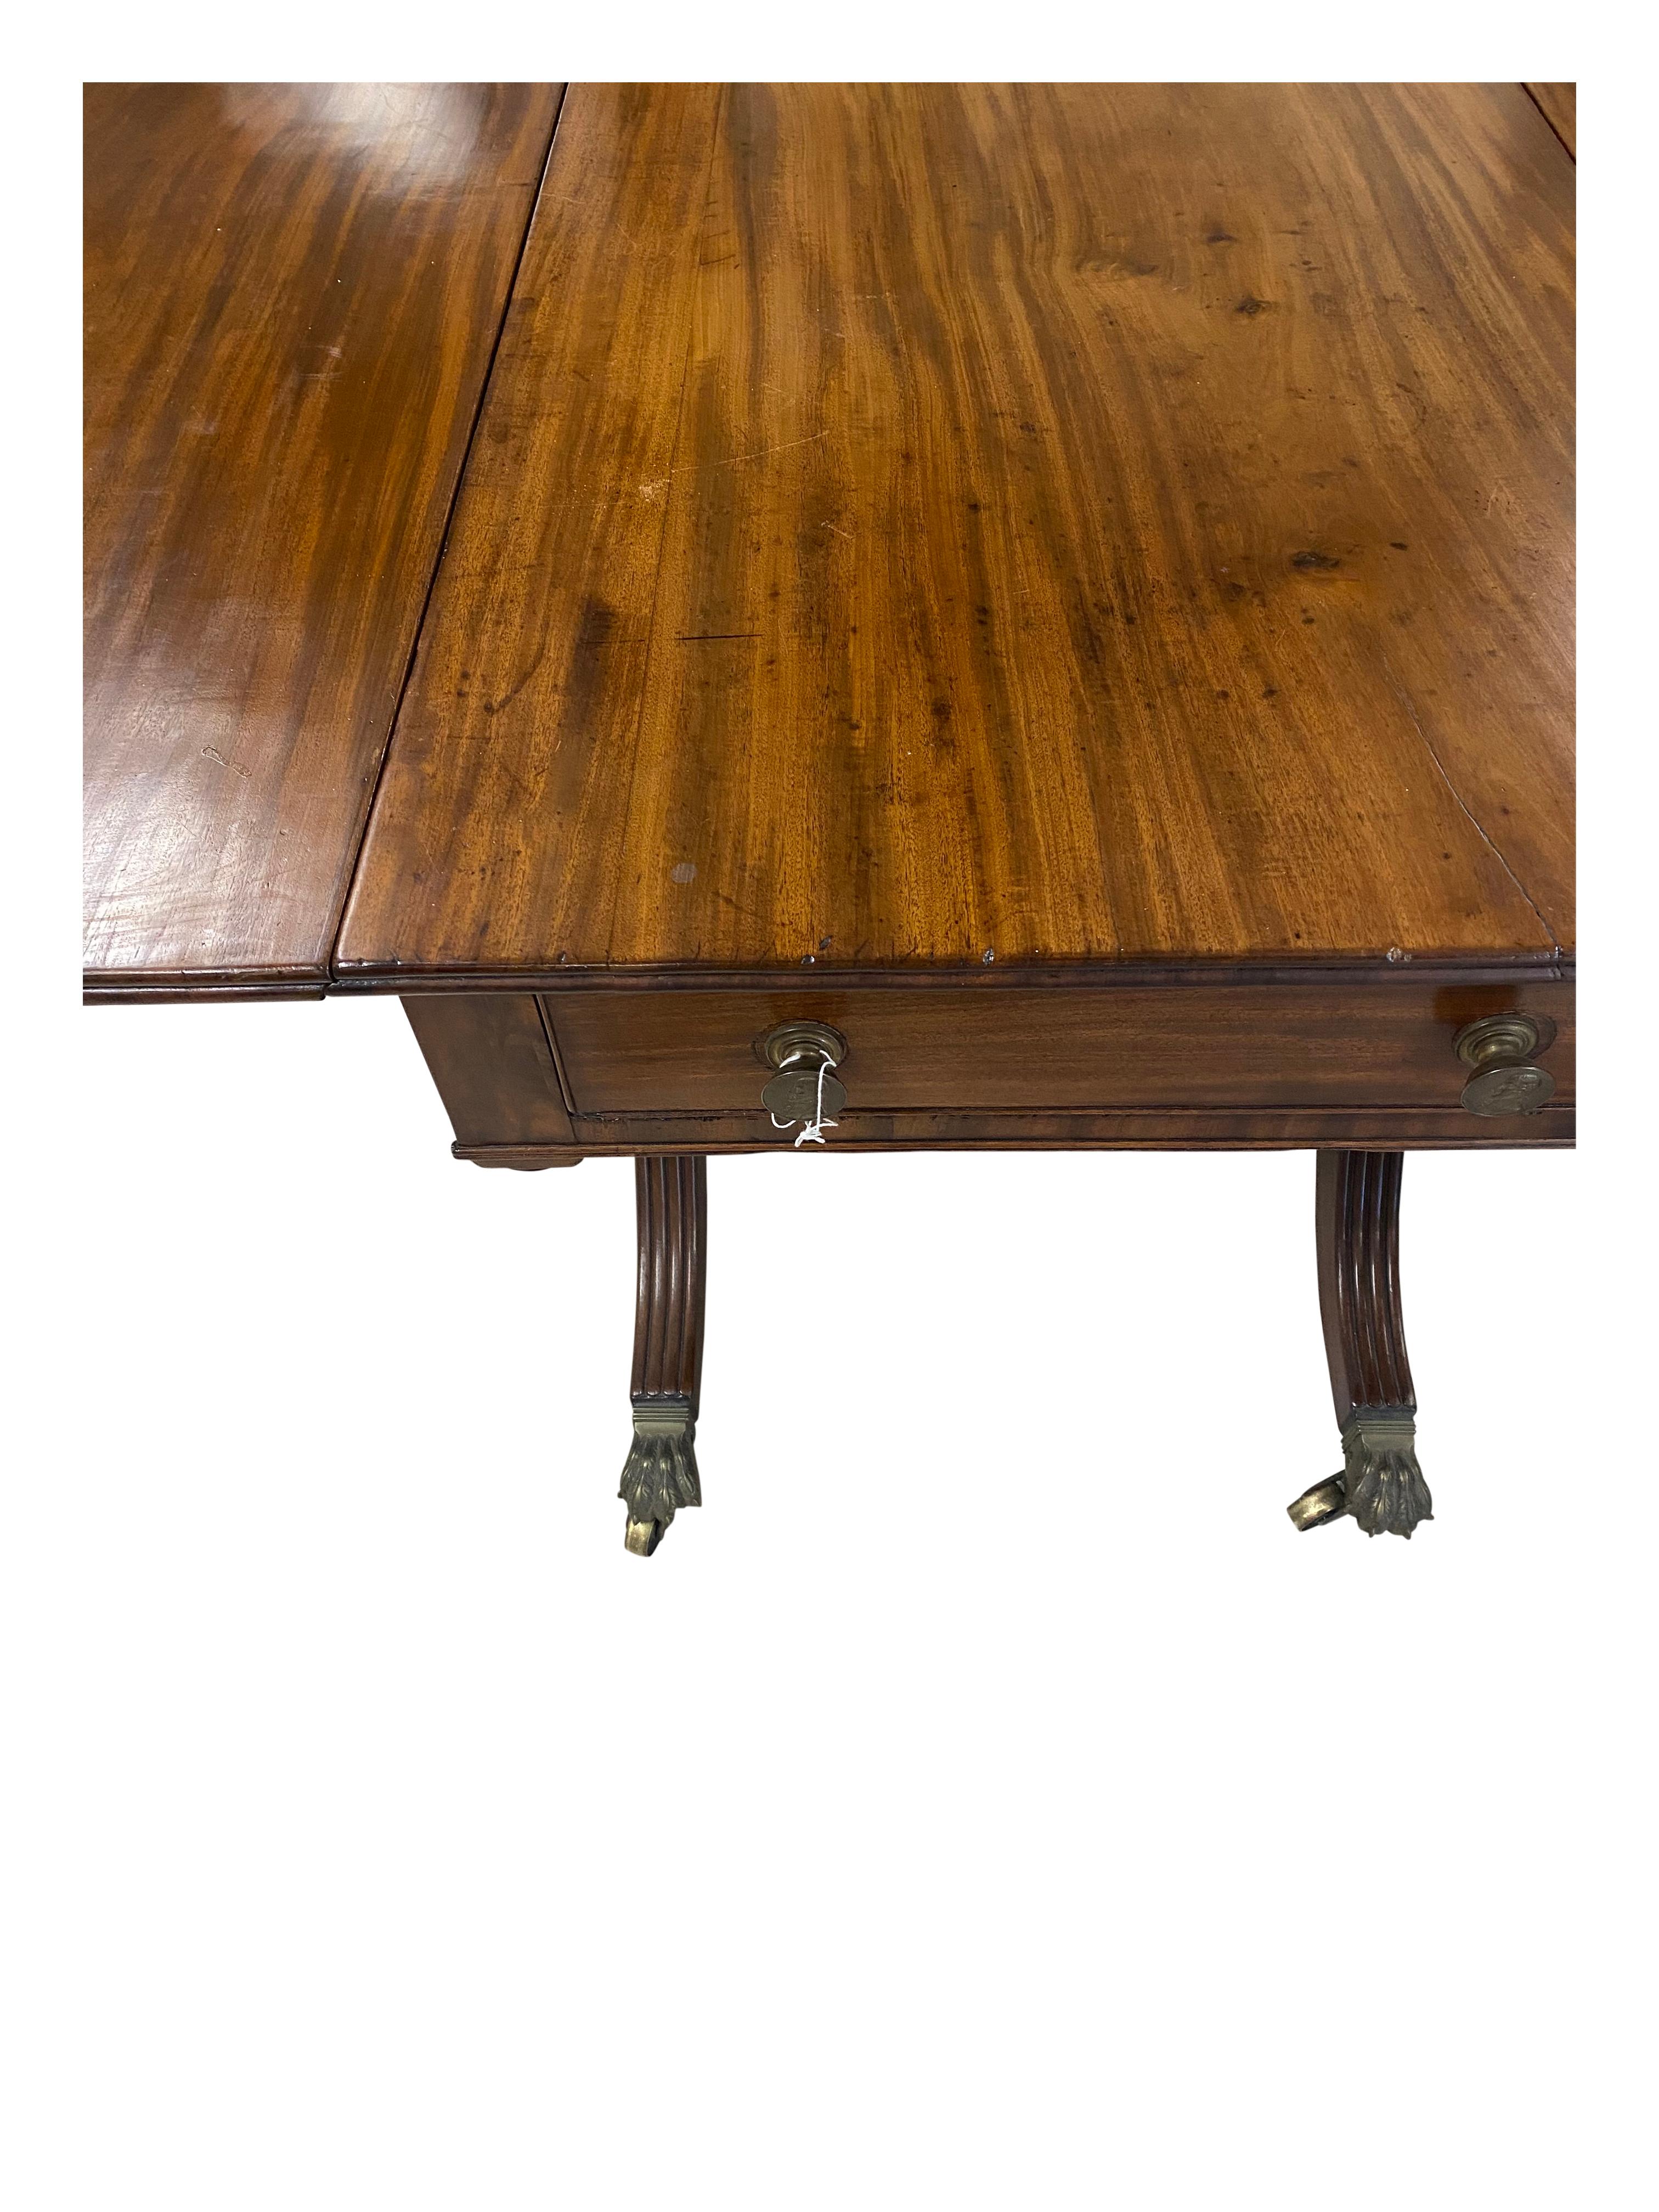 Carved Federal Mahogany Drop Leaf Dining Table circa 1825